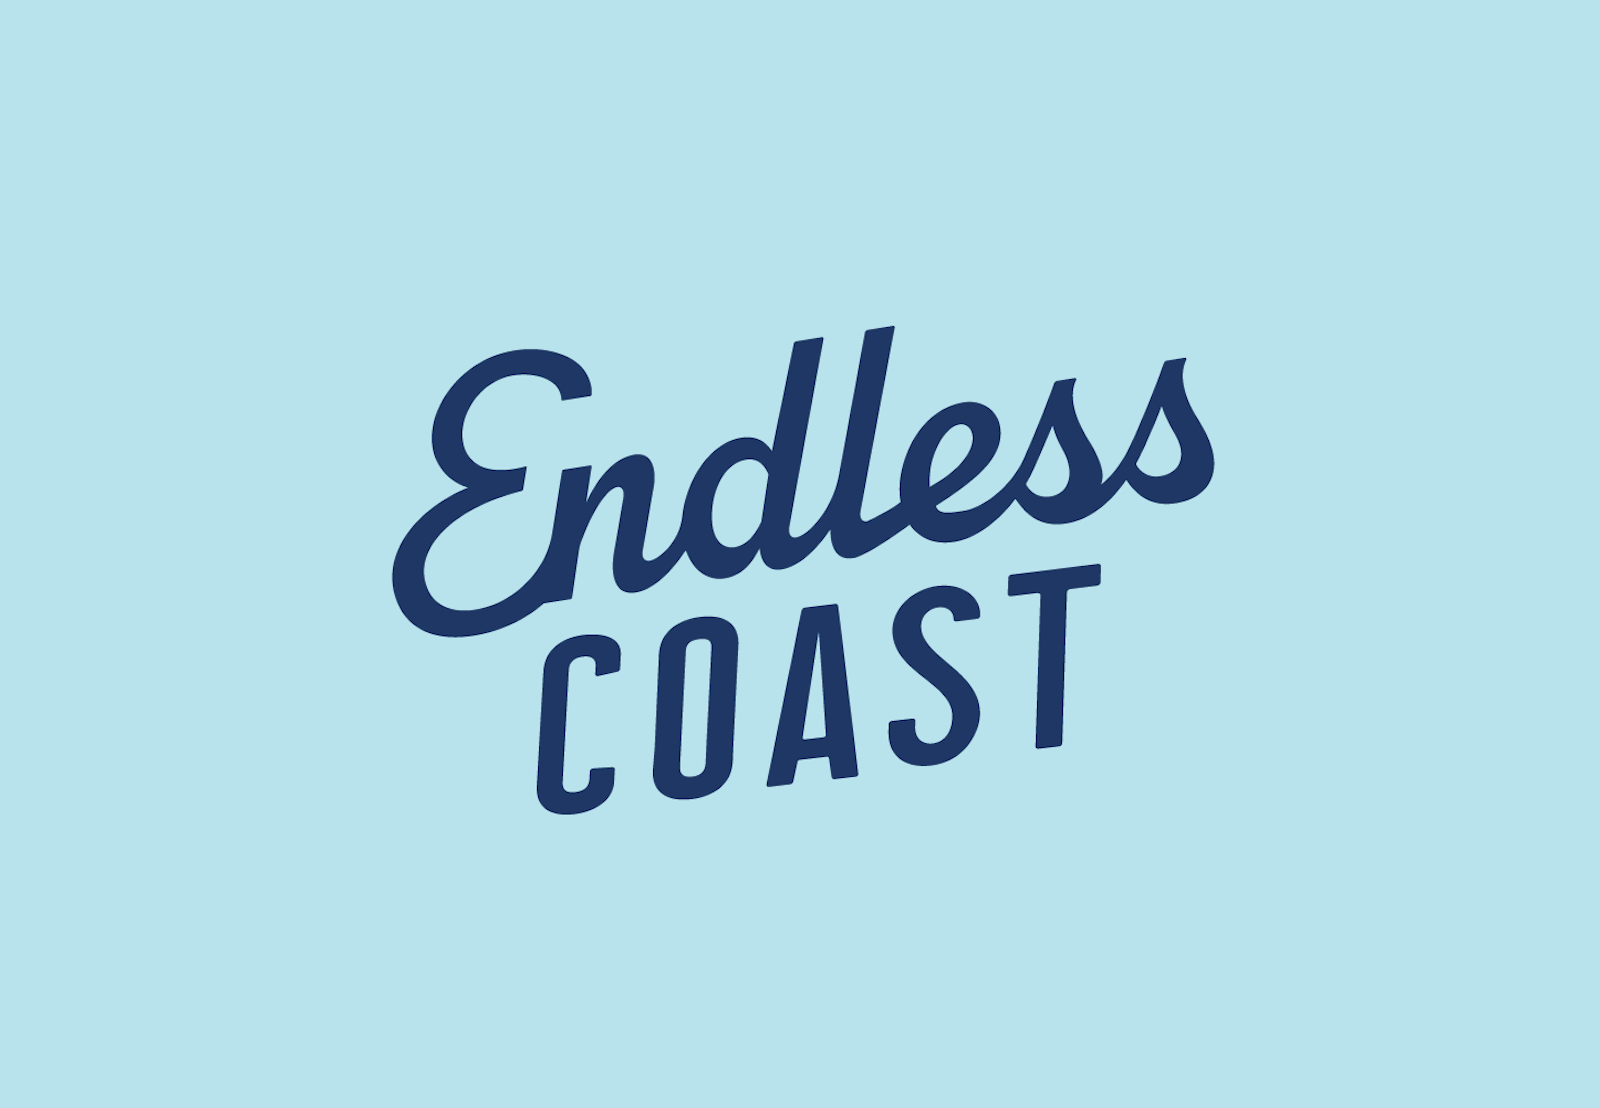 The Endless Coast brand name and logo design on blue background.